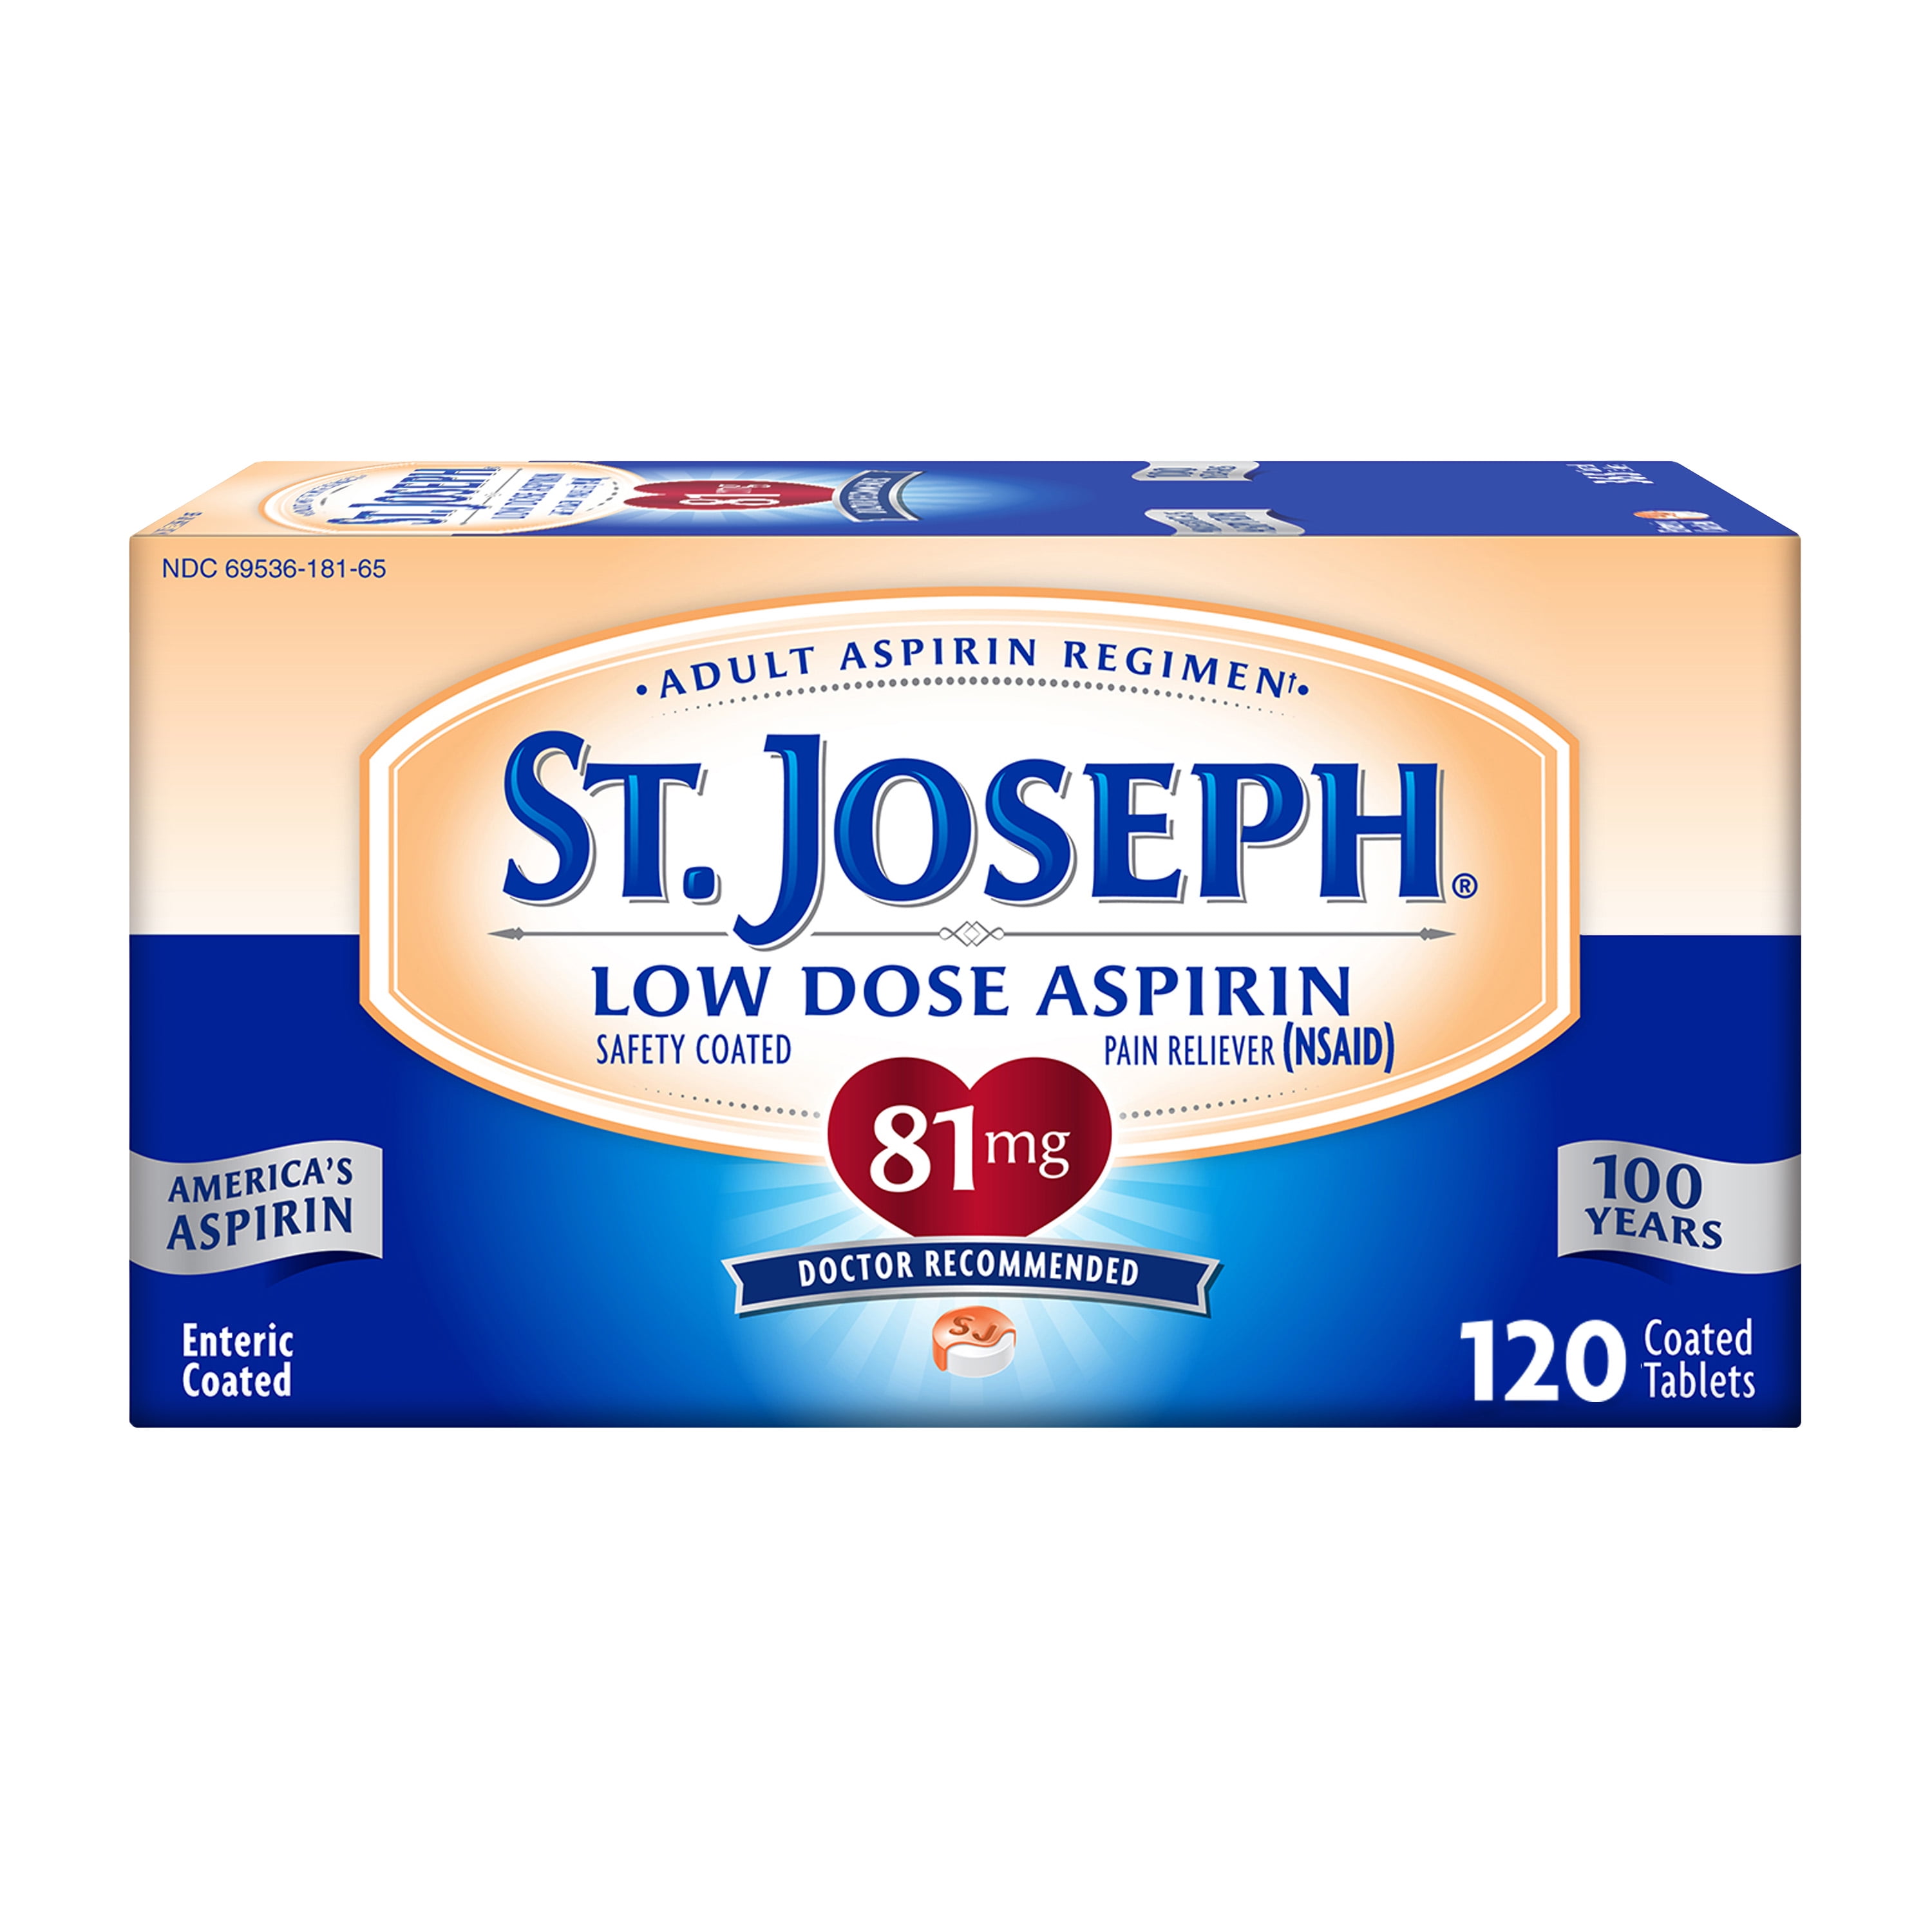 St. Joseph Aspirin Pain Reliever (NSAID) 81mg, Enteric Safety Coated, Adult Low Dose Regimen, 120 ct.